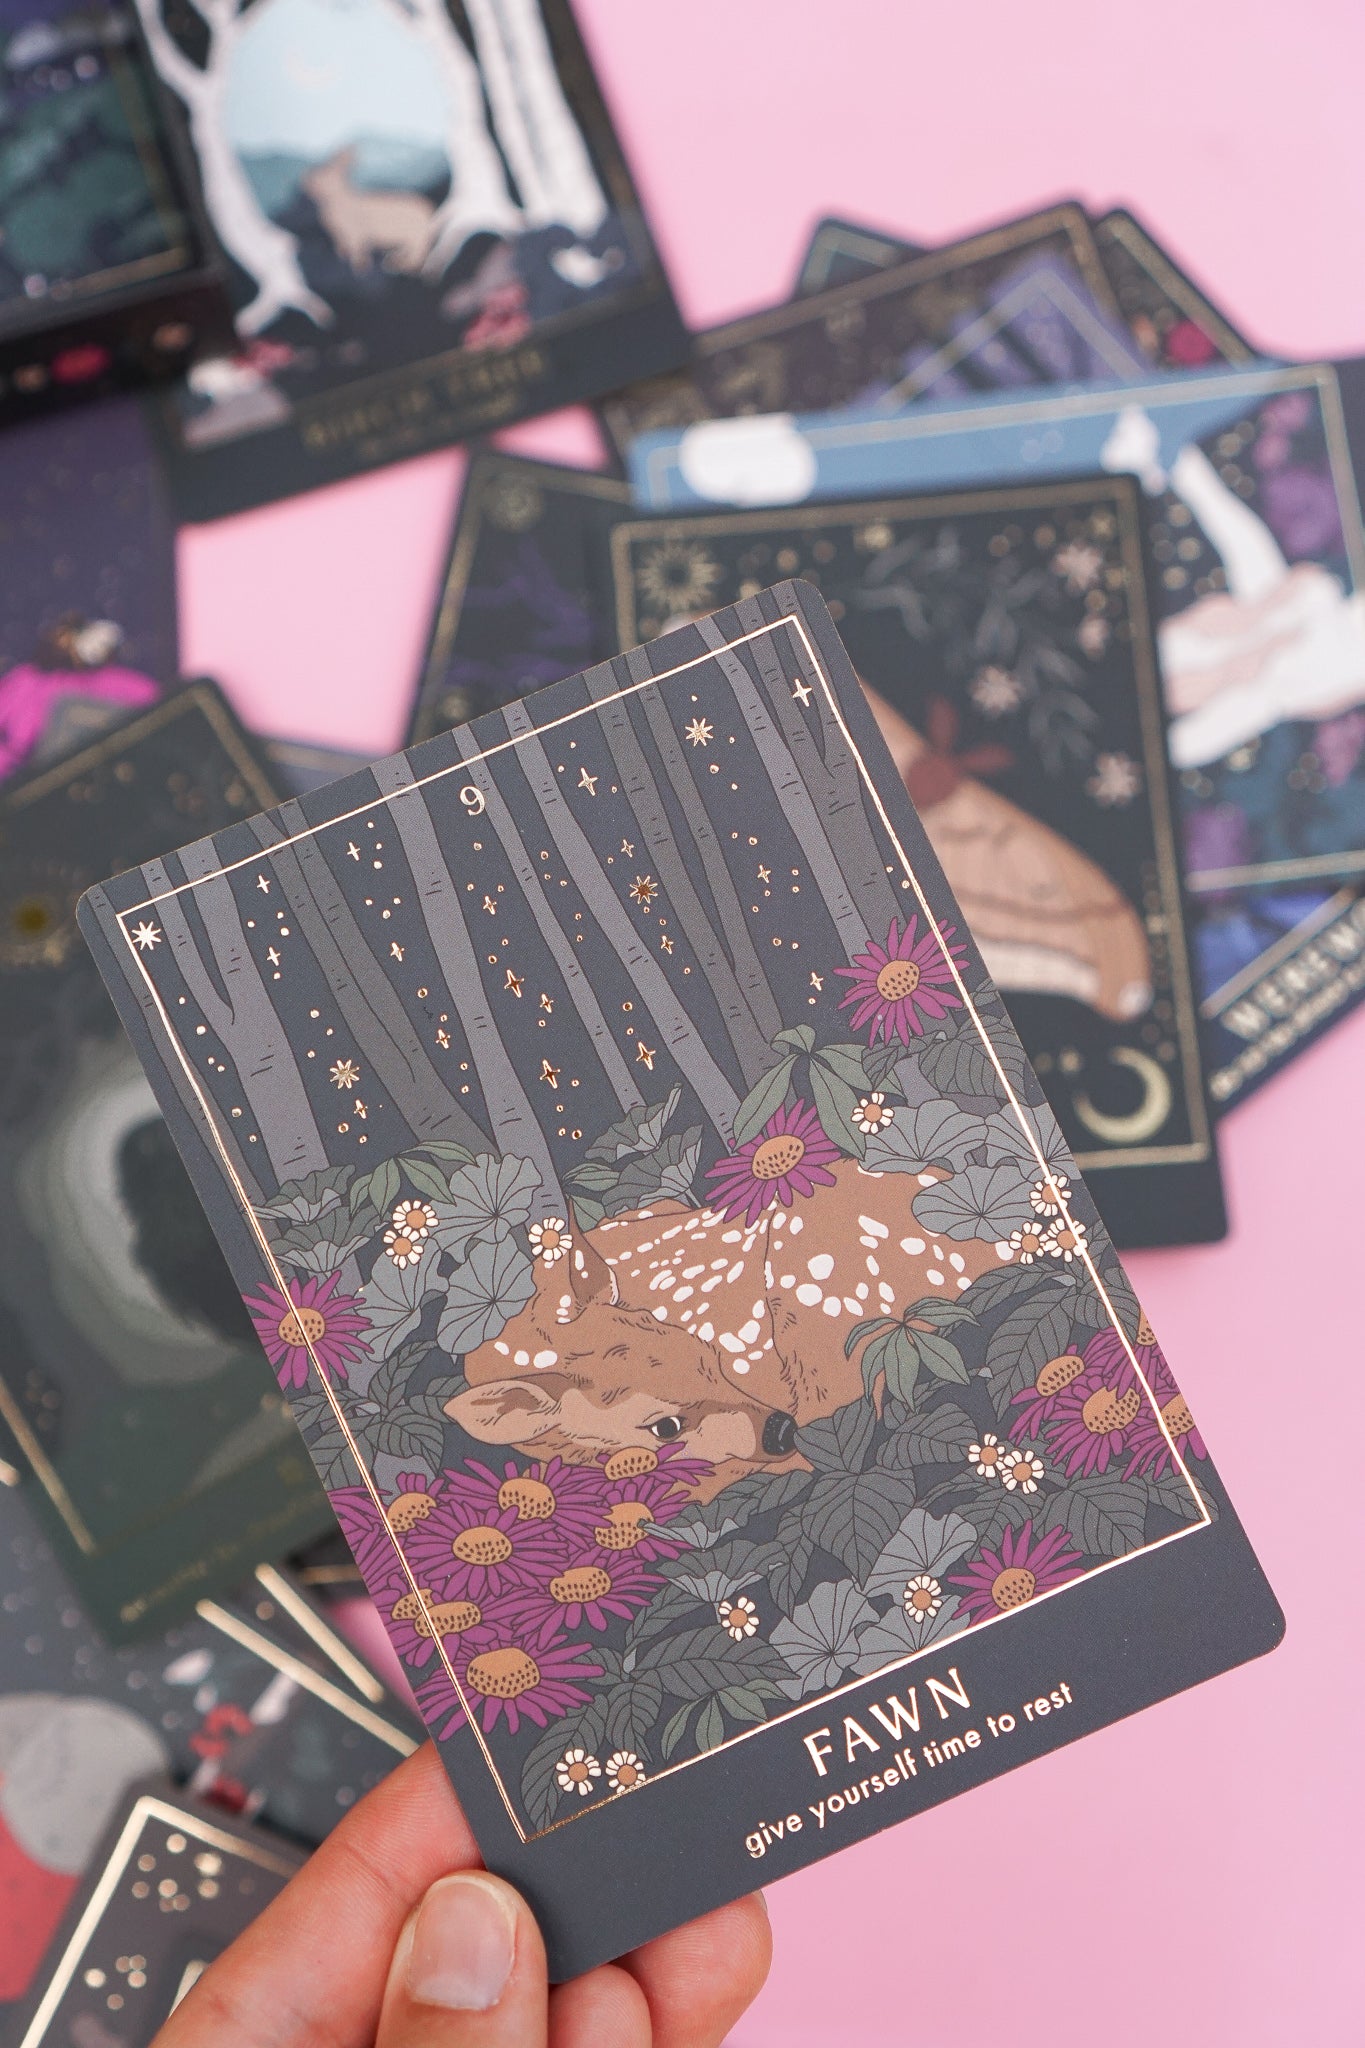 Forest Tales Oracle deck  -  Moon Witch series